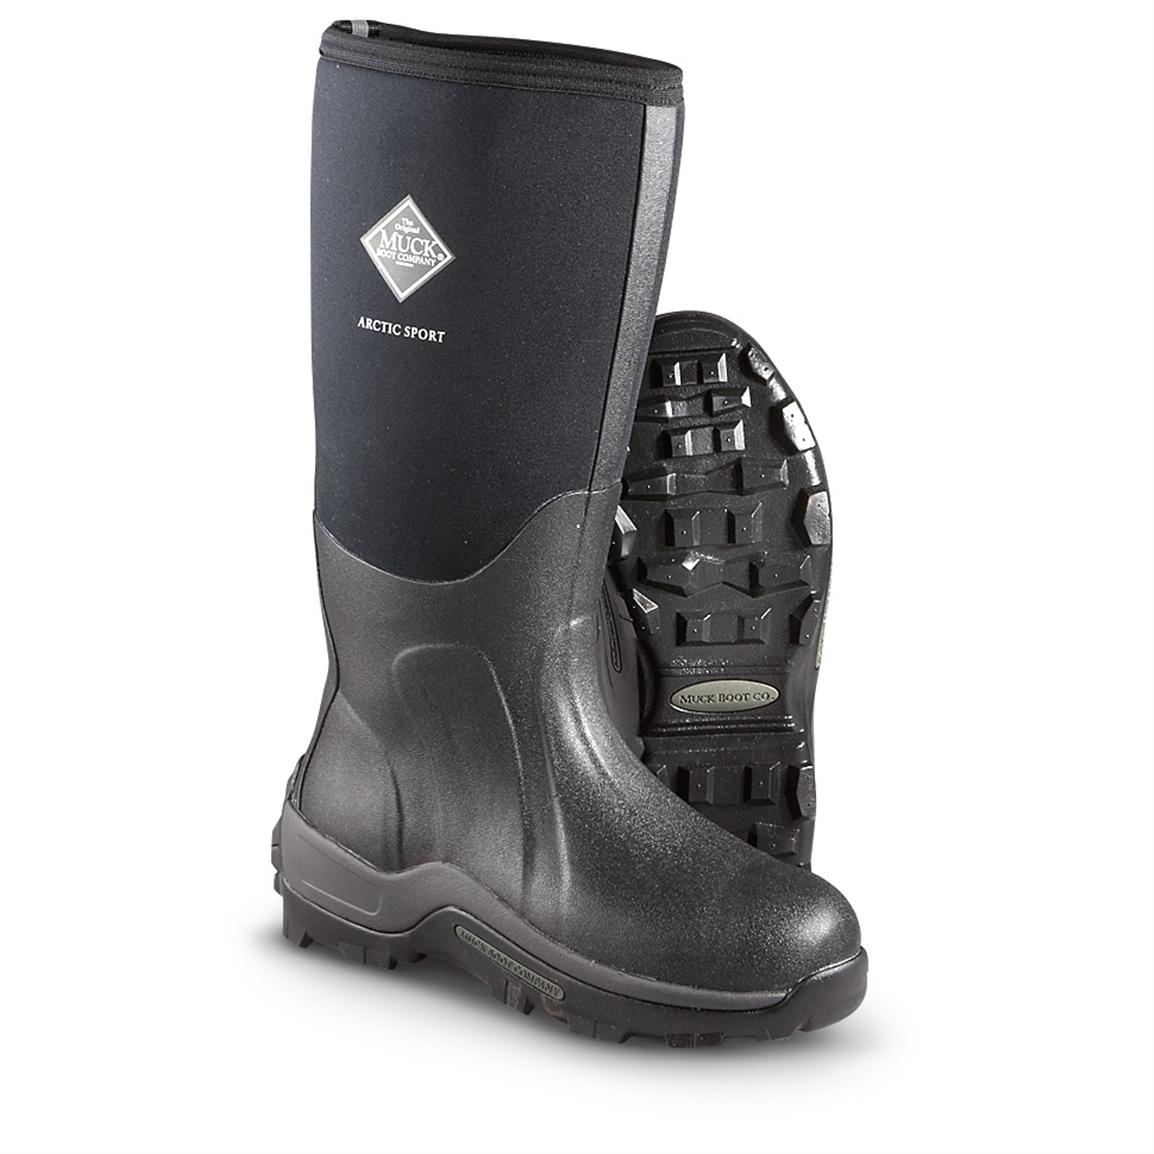 muck steel toe insulated rubber boots